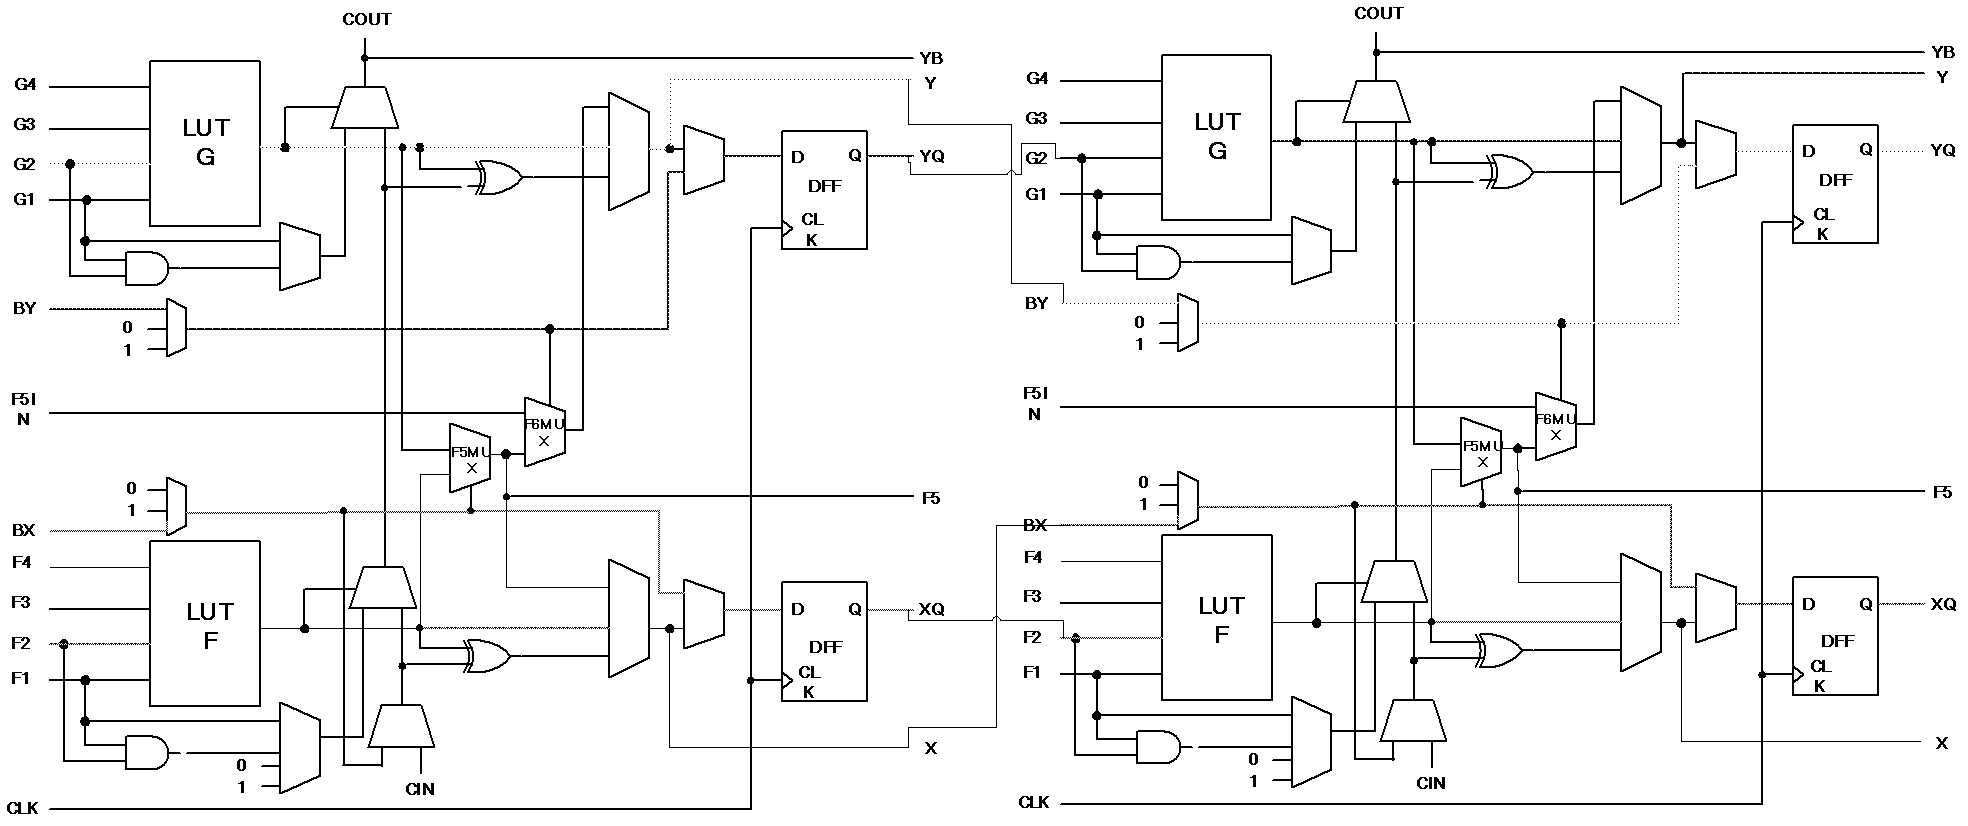 Testing method for FPGA (field programmable gate array) single long wire and directly connected switch